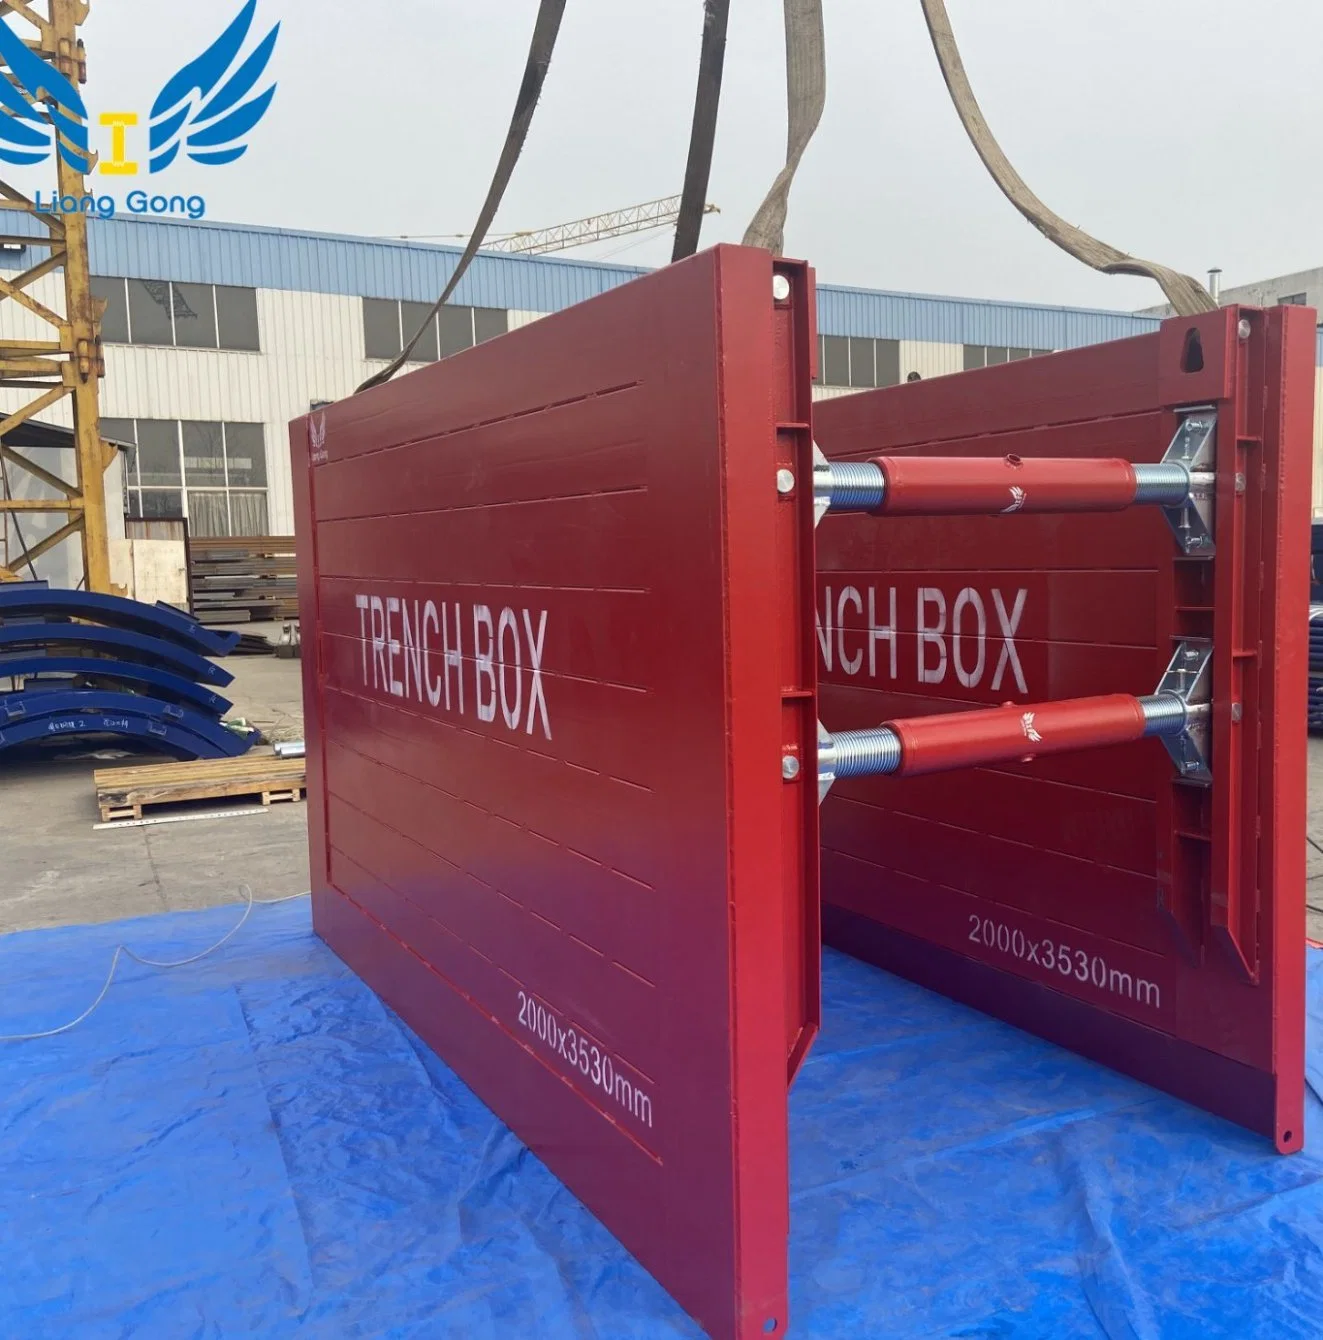 China Lianggong Manufacture Competitive Price Light-Weight Customized Shoring Formwork Trench Box for Pipeline Laying Construction